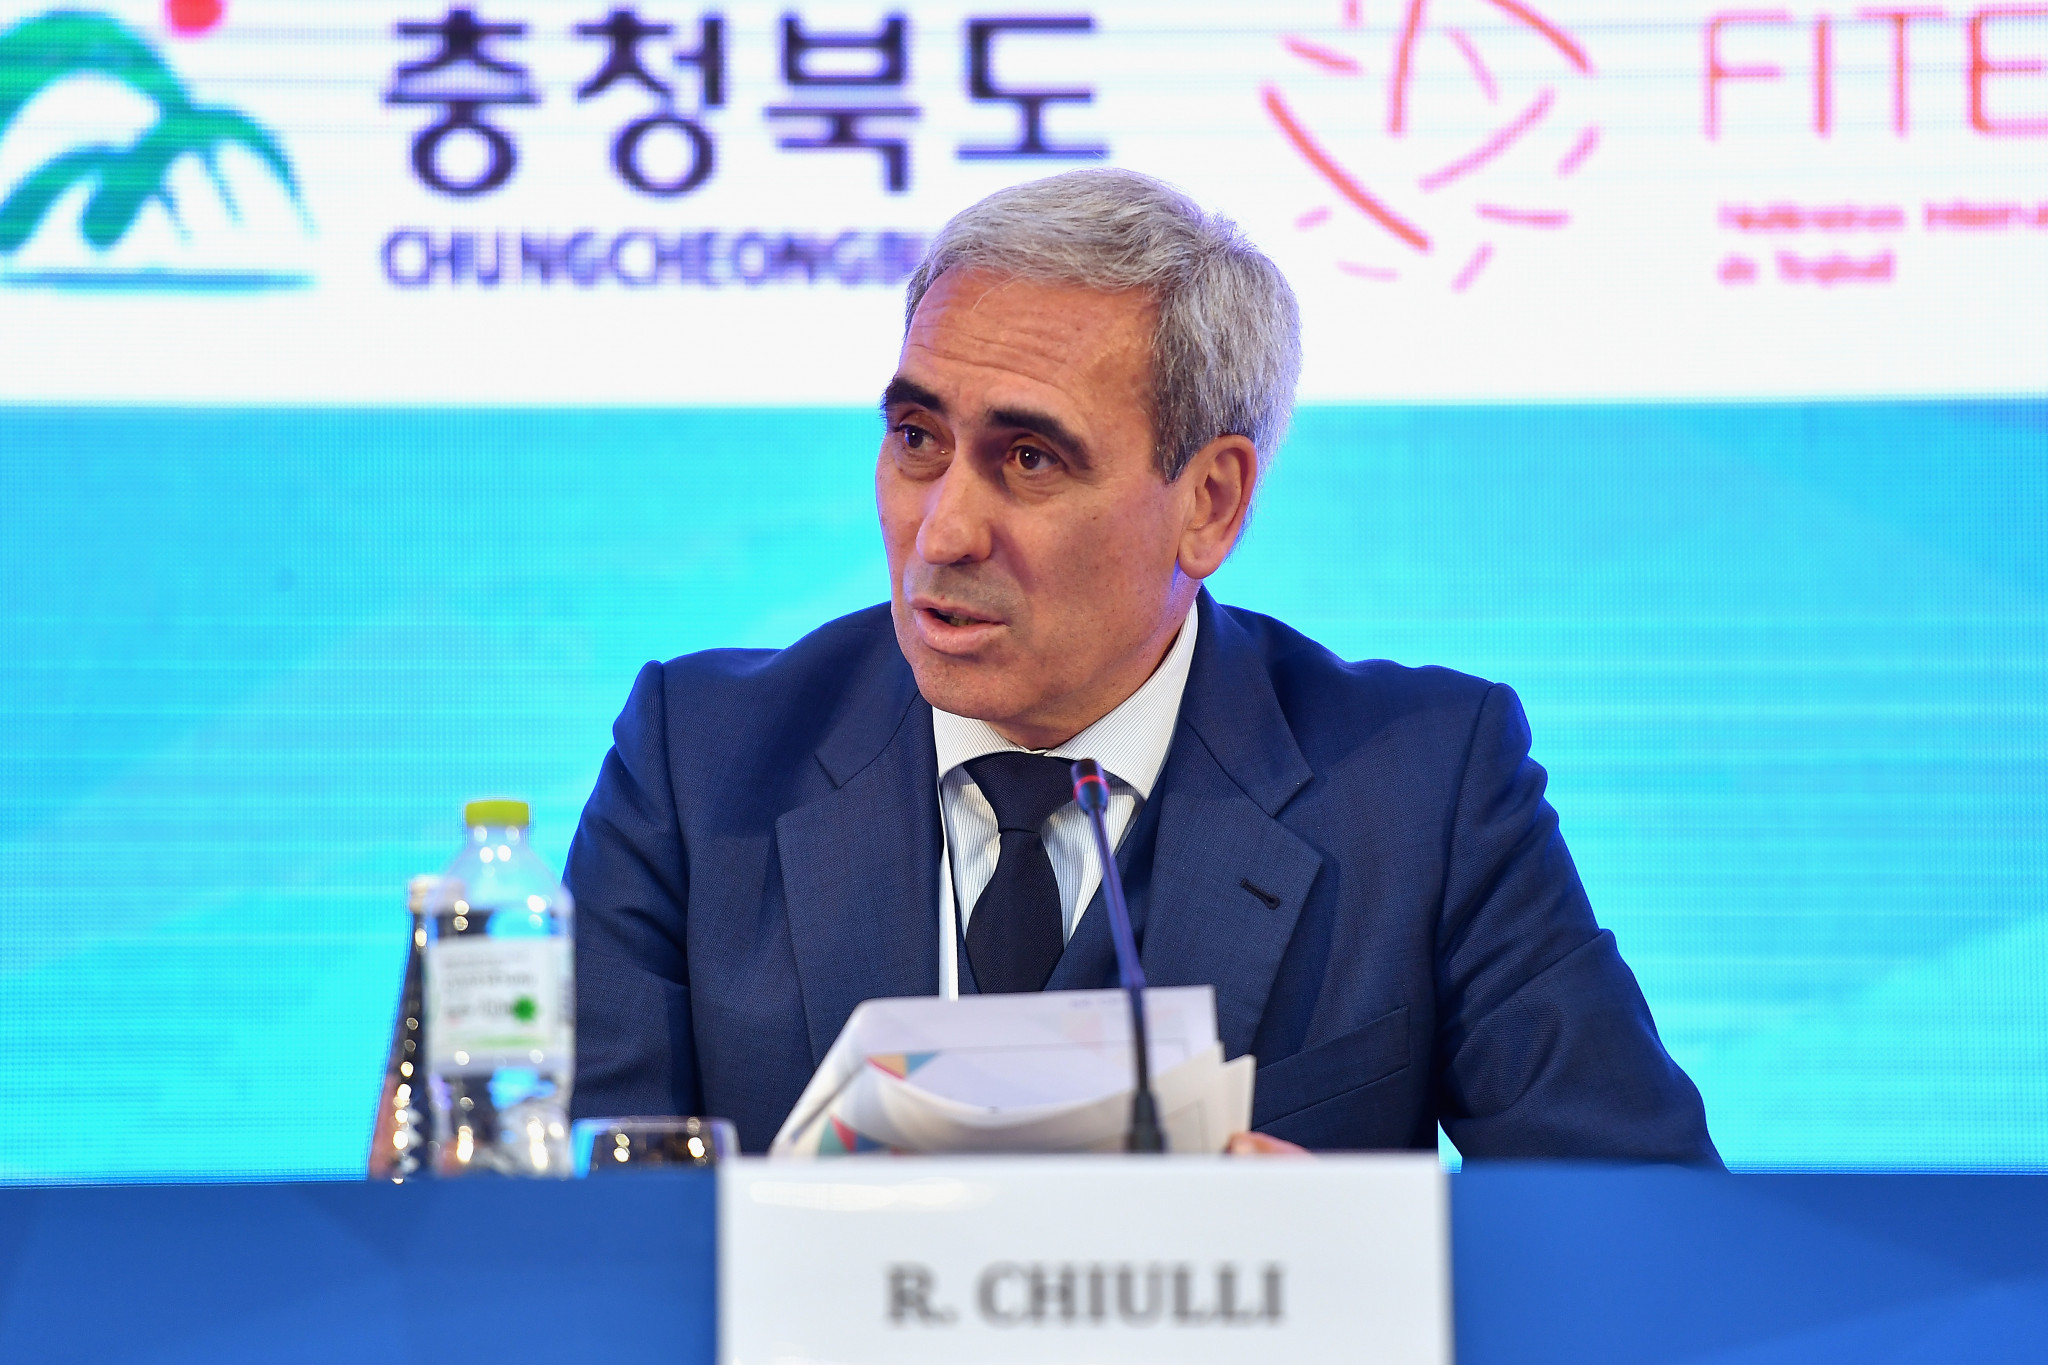 Chiulli re-elected ARISF President at General Assembly as GAISF future discussed